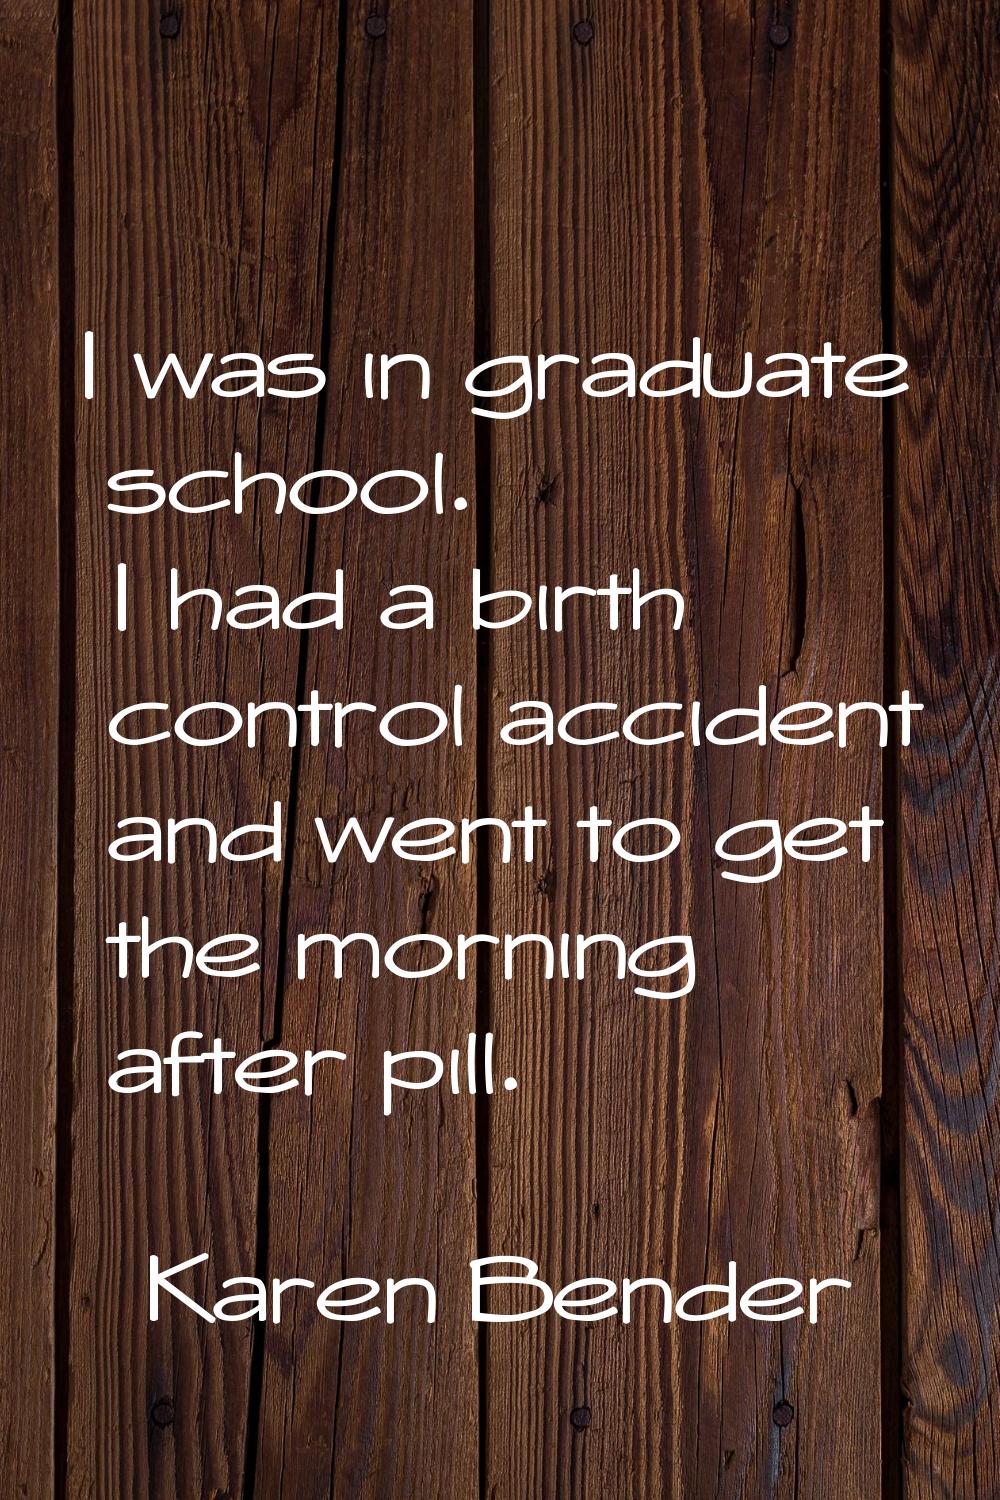 I was in graduate school. I had a birth control accident and went to get the morning after pill.